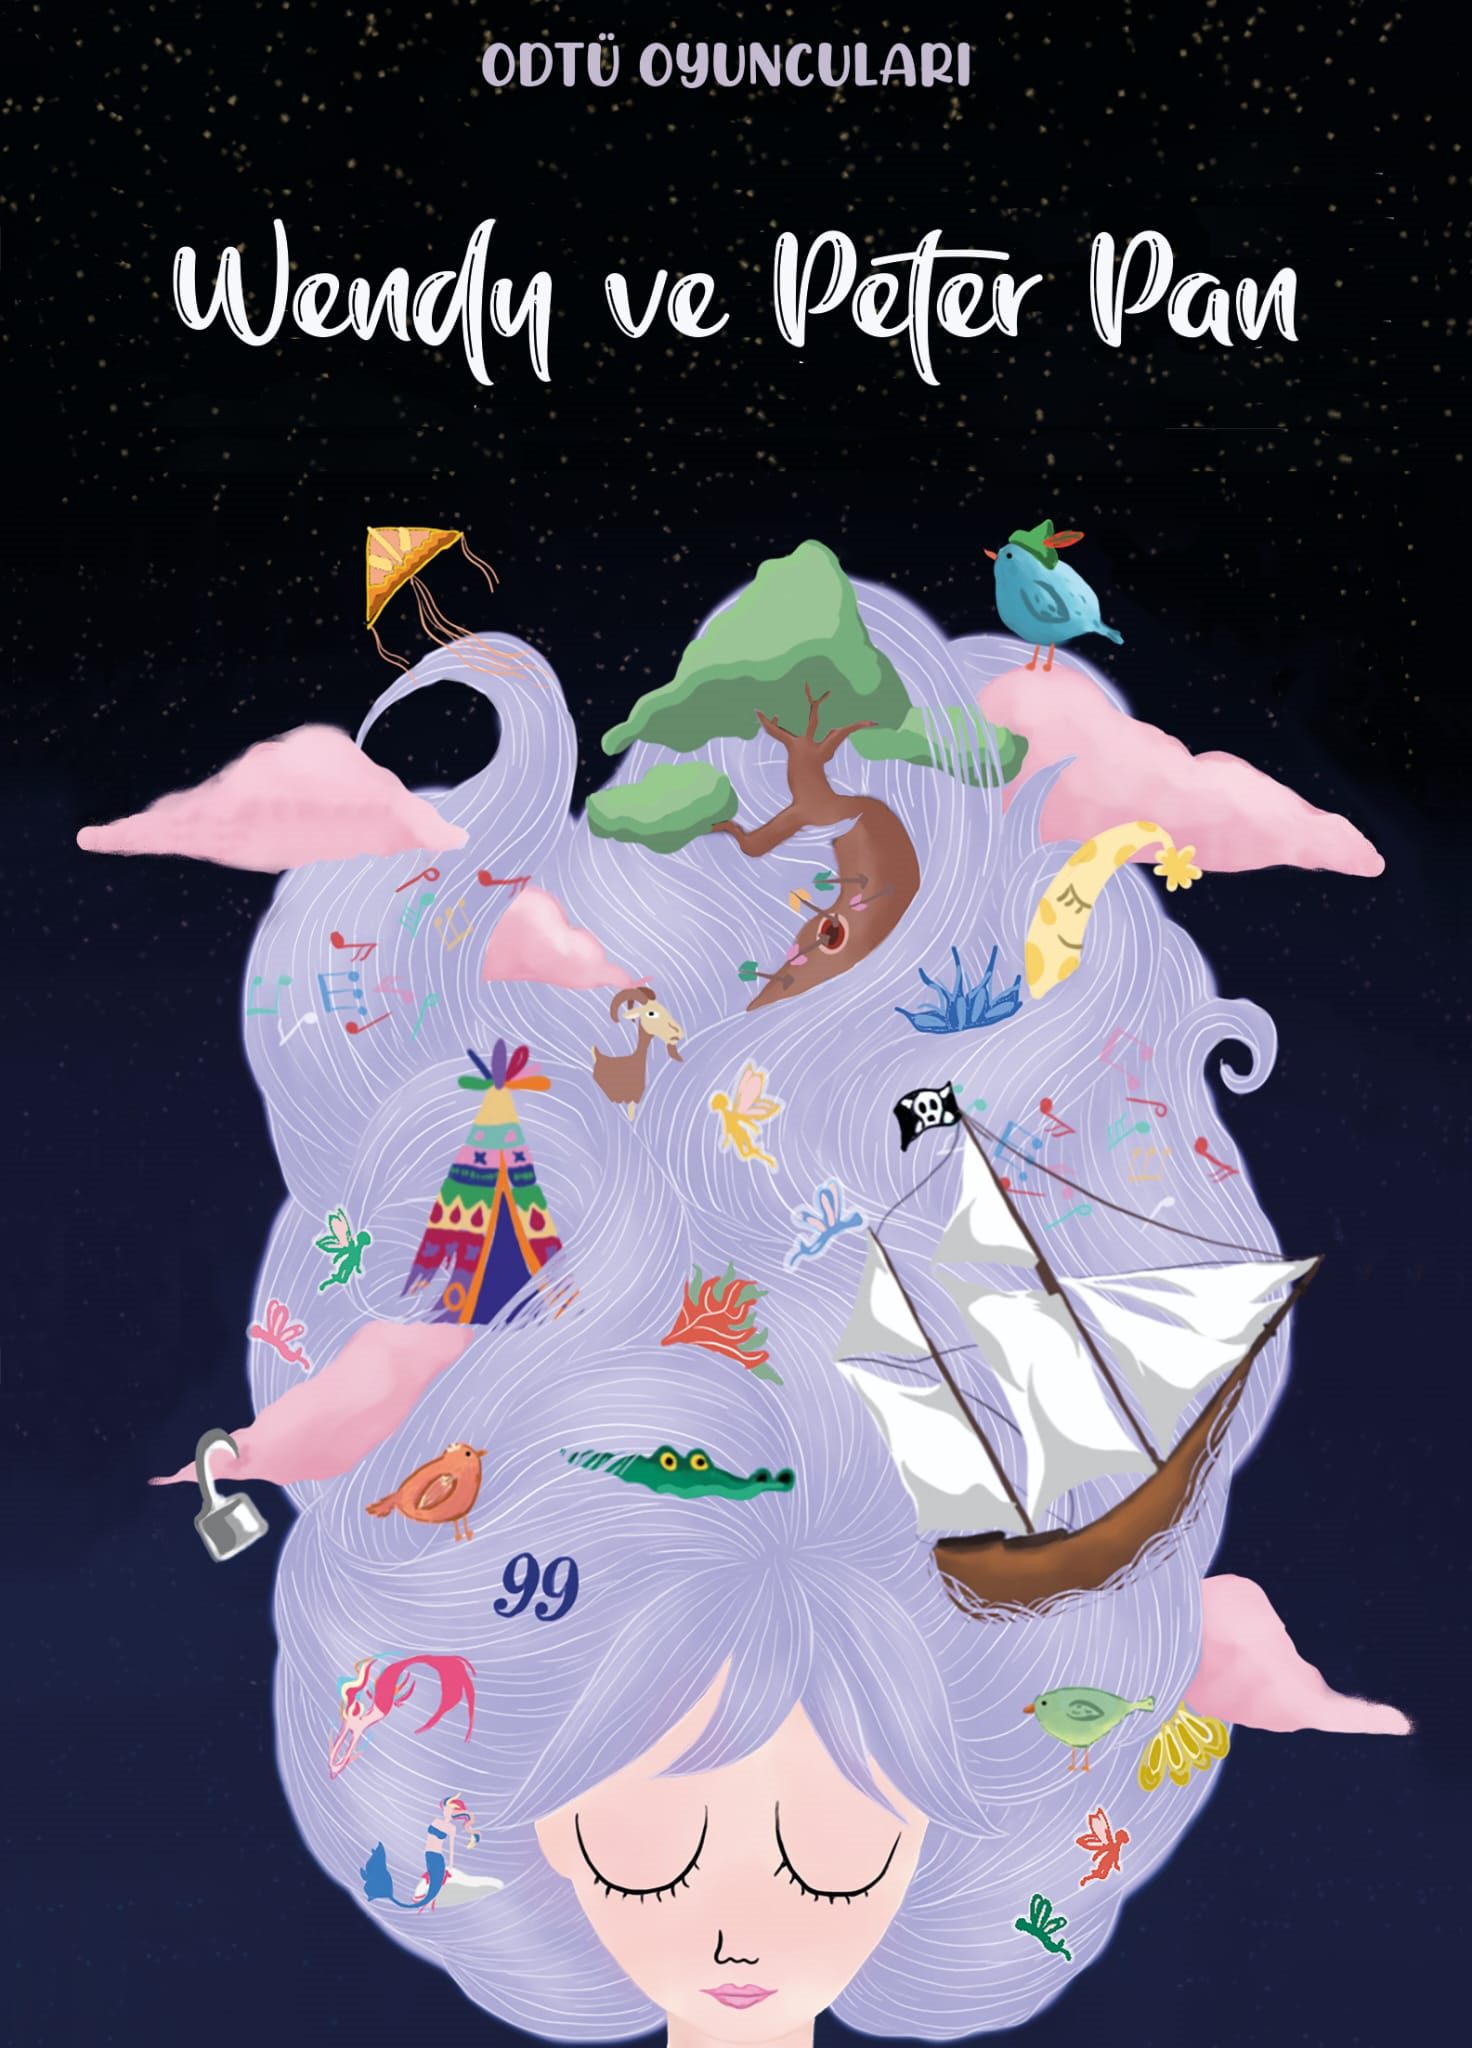 "Wendy and Peter Pan" game poster (2021)